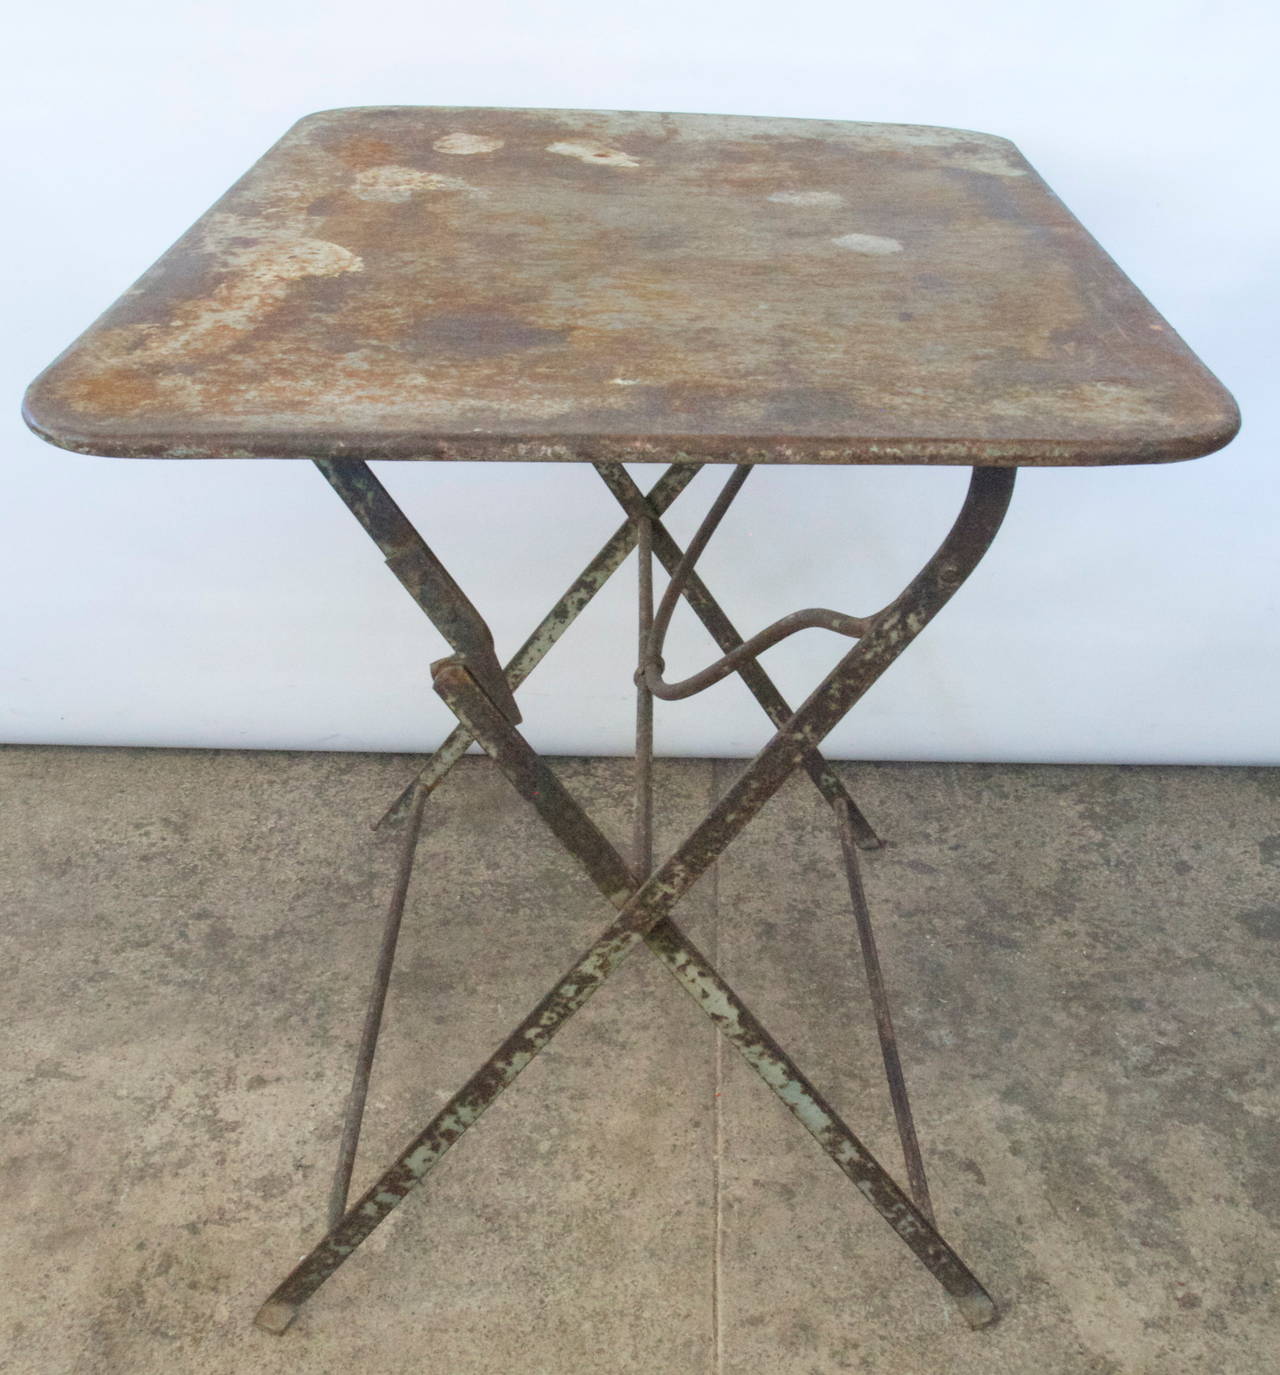 Late 19th-early 20th century French rectangular metal top on folding metal base garden table with nice character and patina.